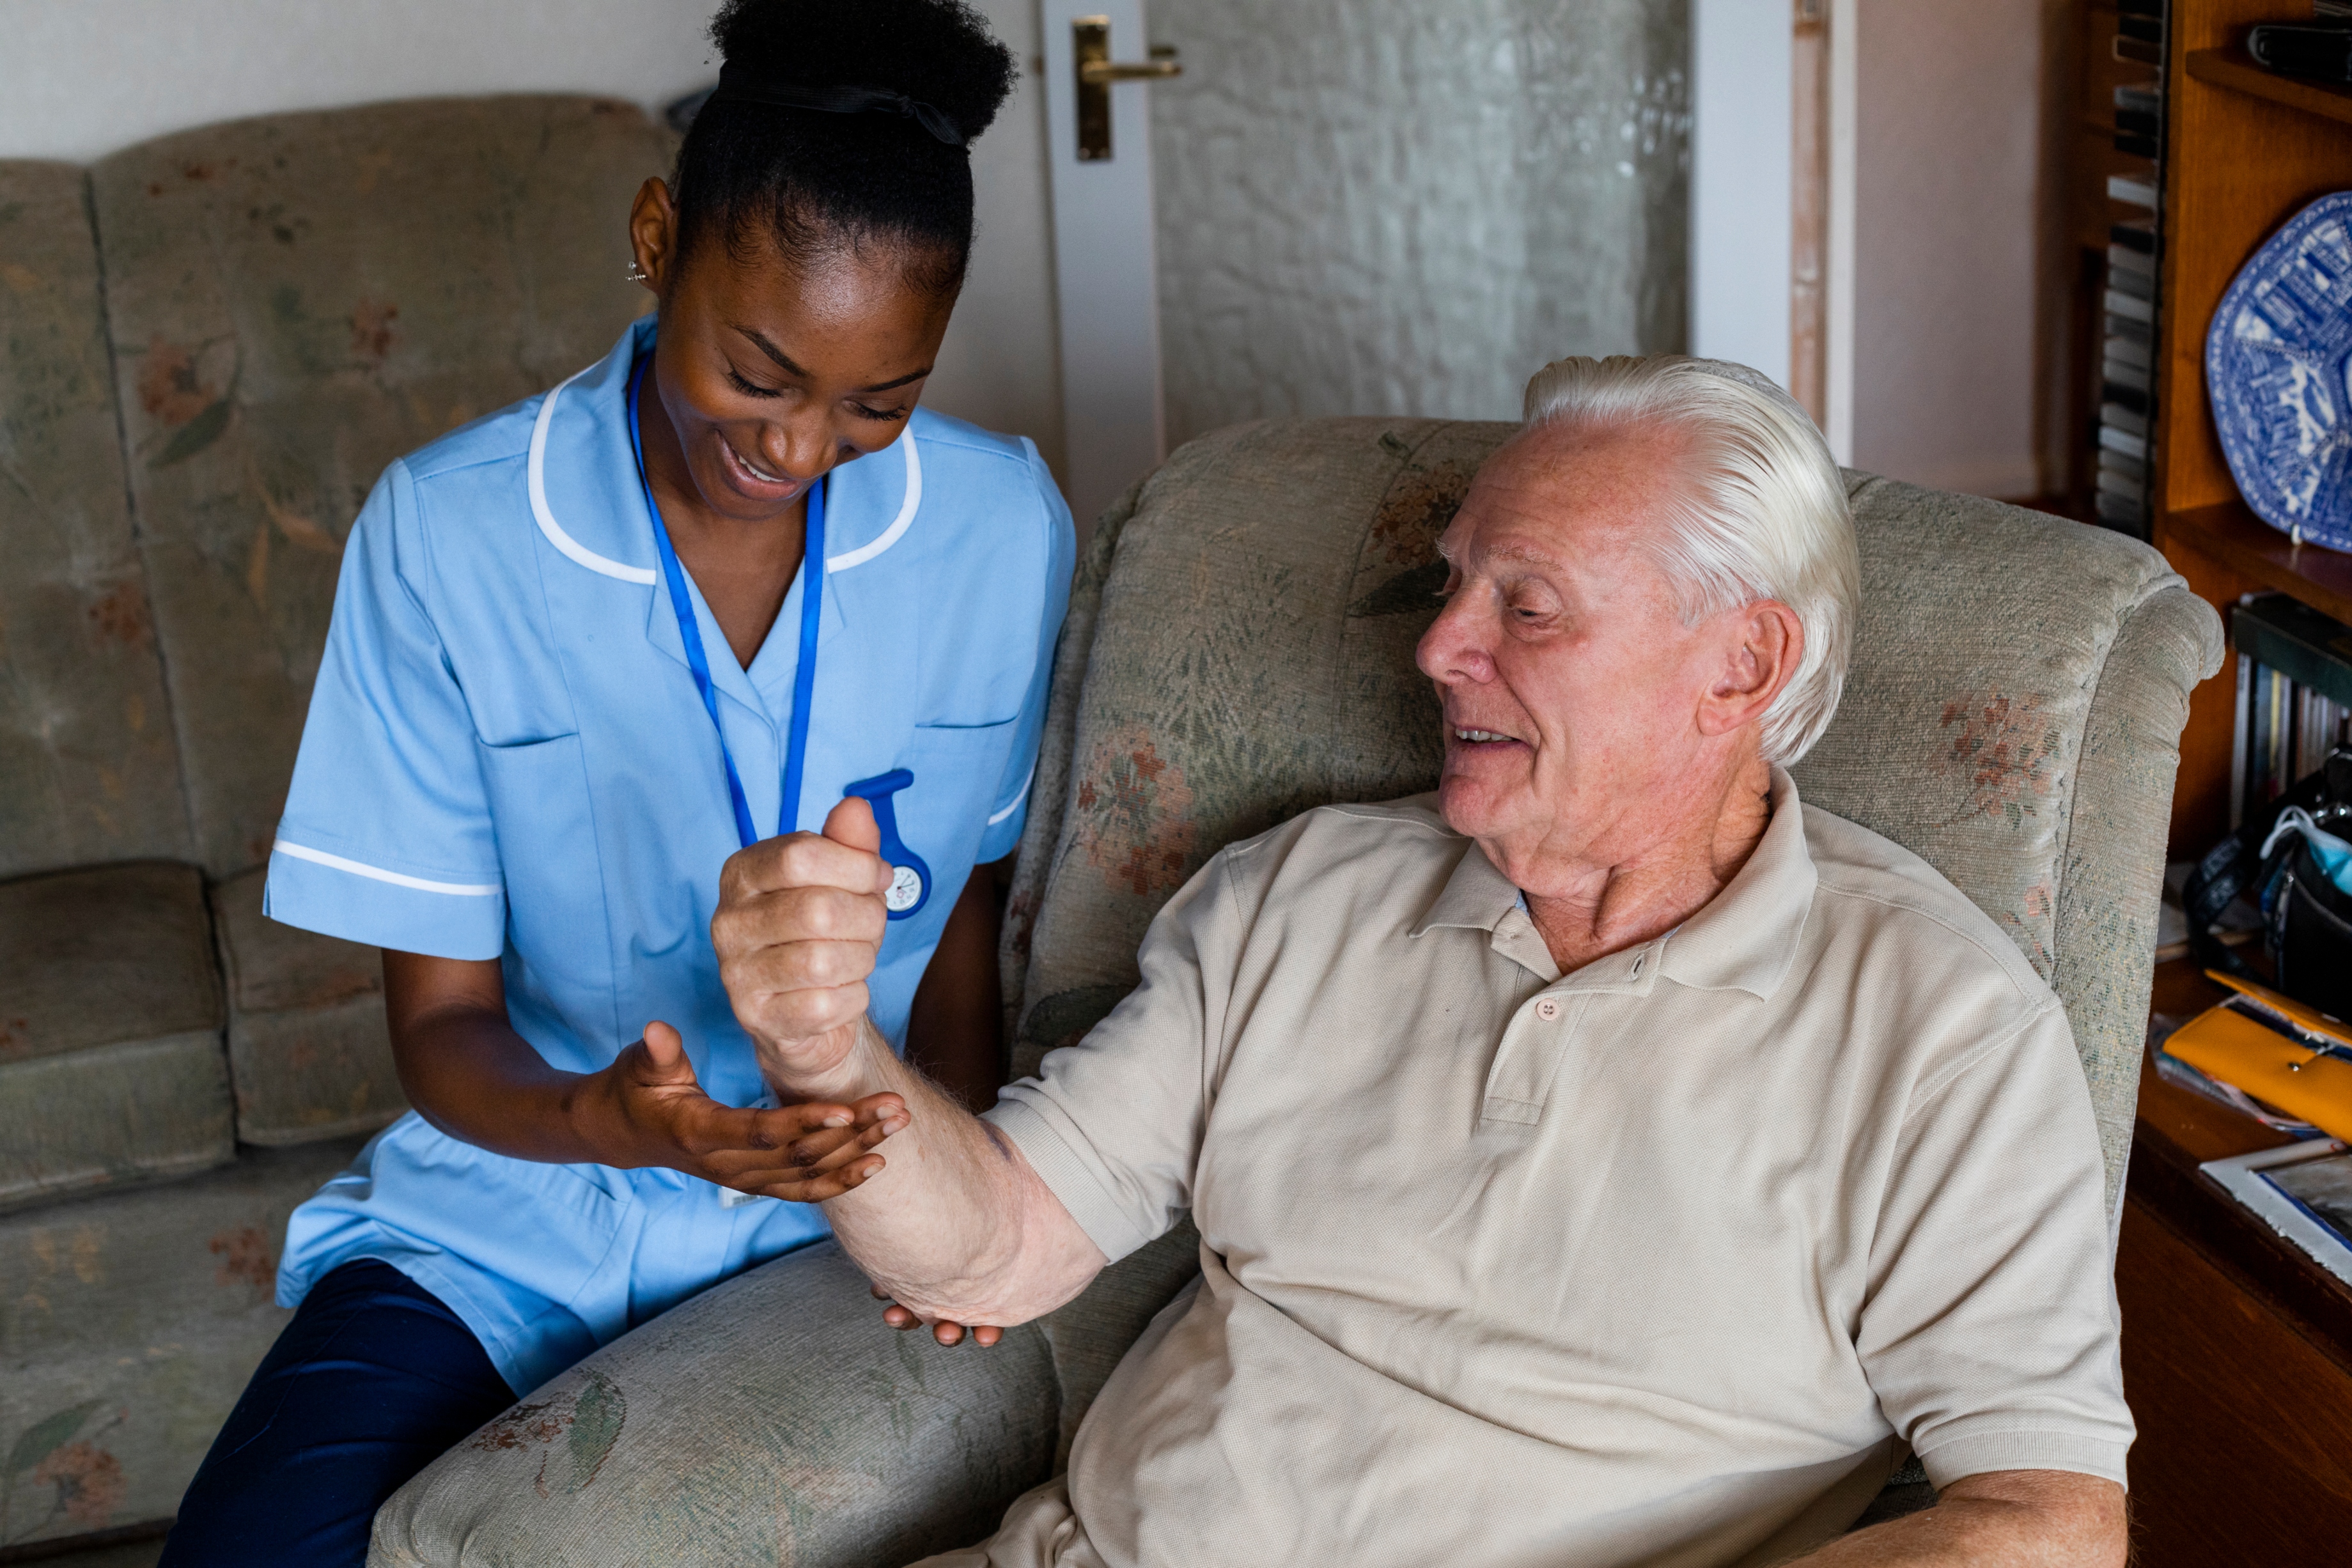 Nurse examining/treating a senior patient with arthritis who is sitting in a chair in his living room in the North East of England. The nurse is looking over his hand.